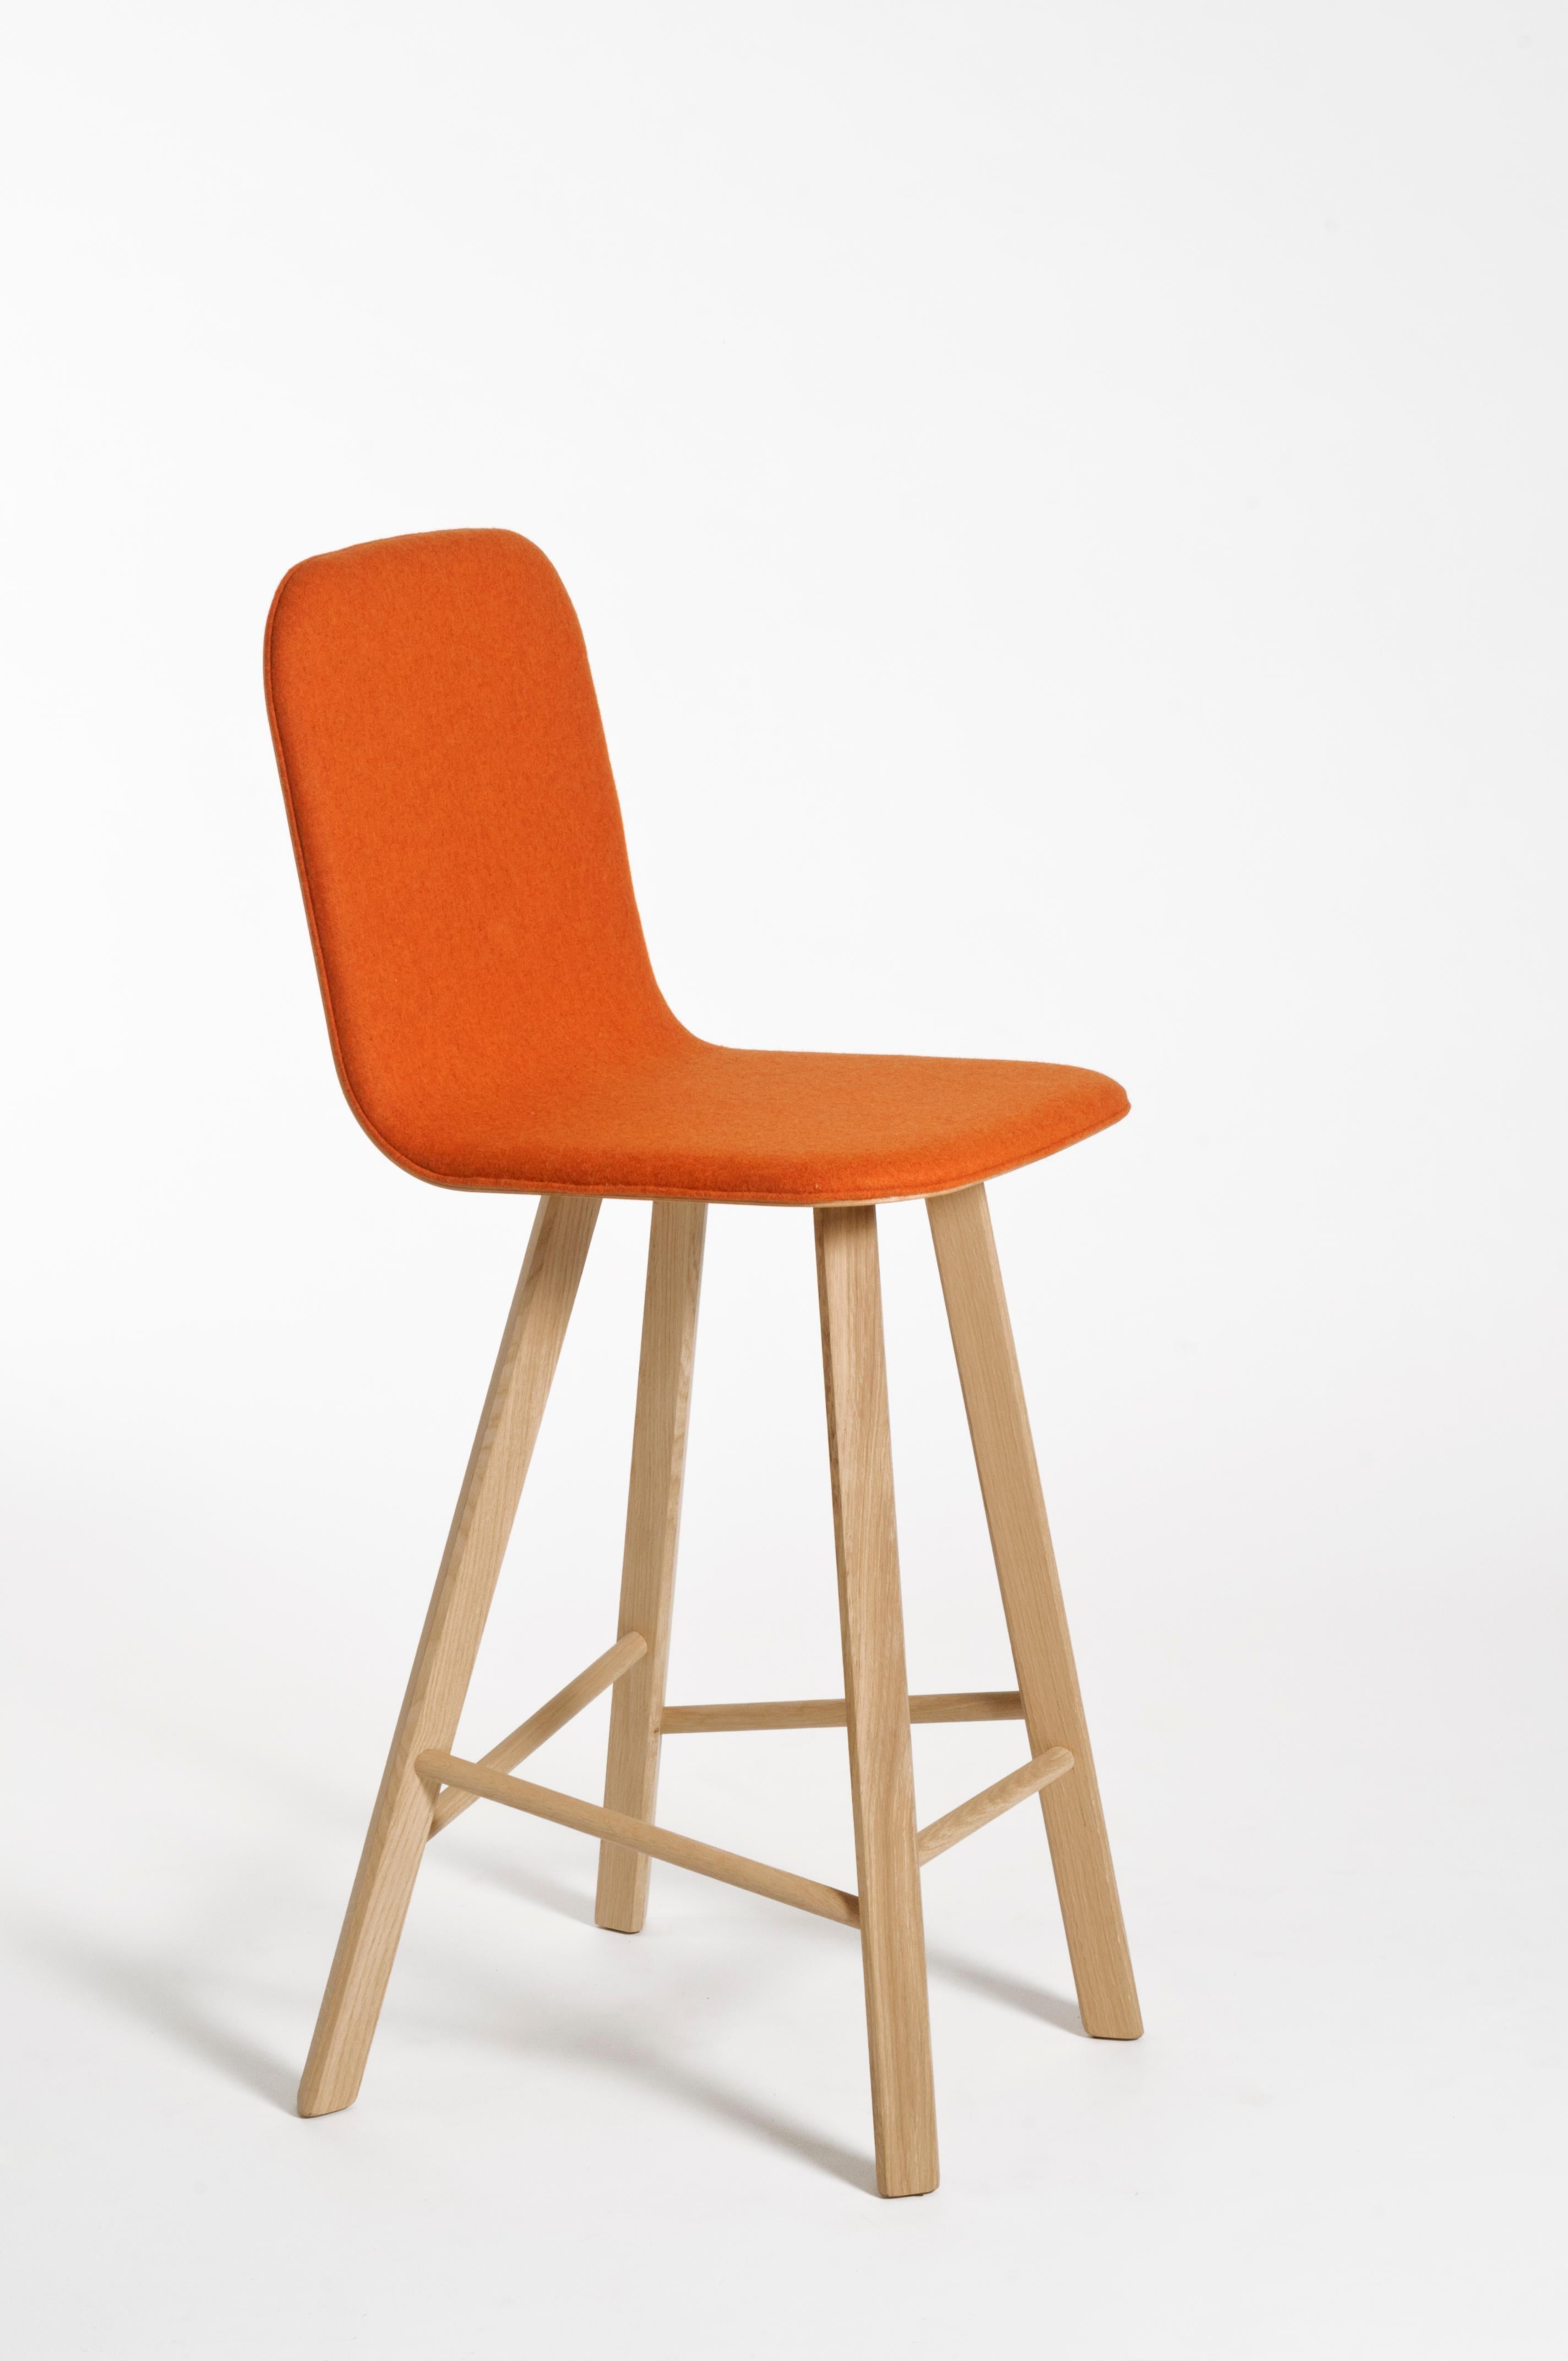 Machine-Made Tria Stool HB Leather by Colé, Minimalist Design Icon Inspired to Graphic Art For Sale